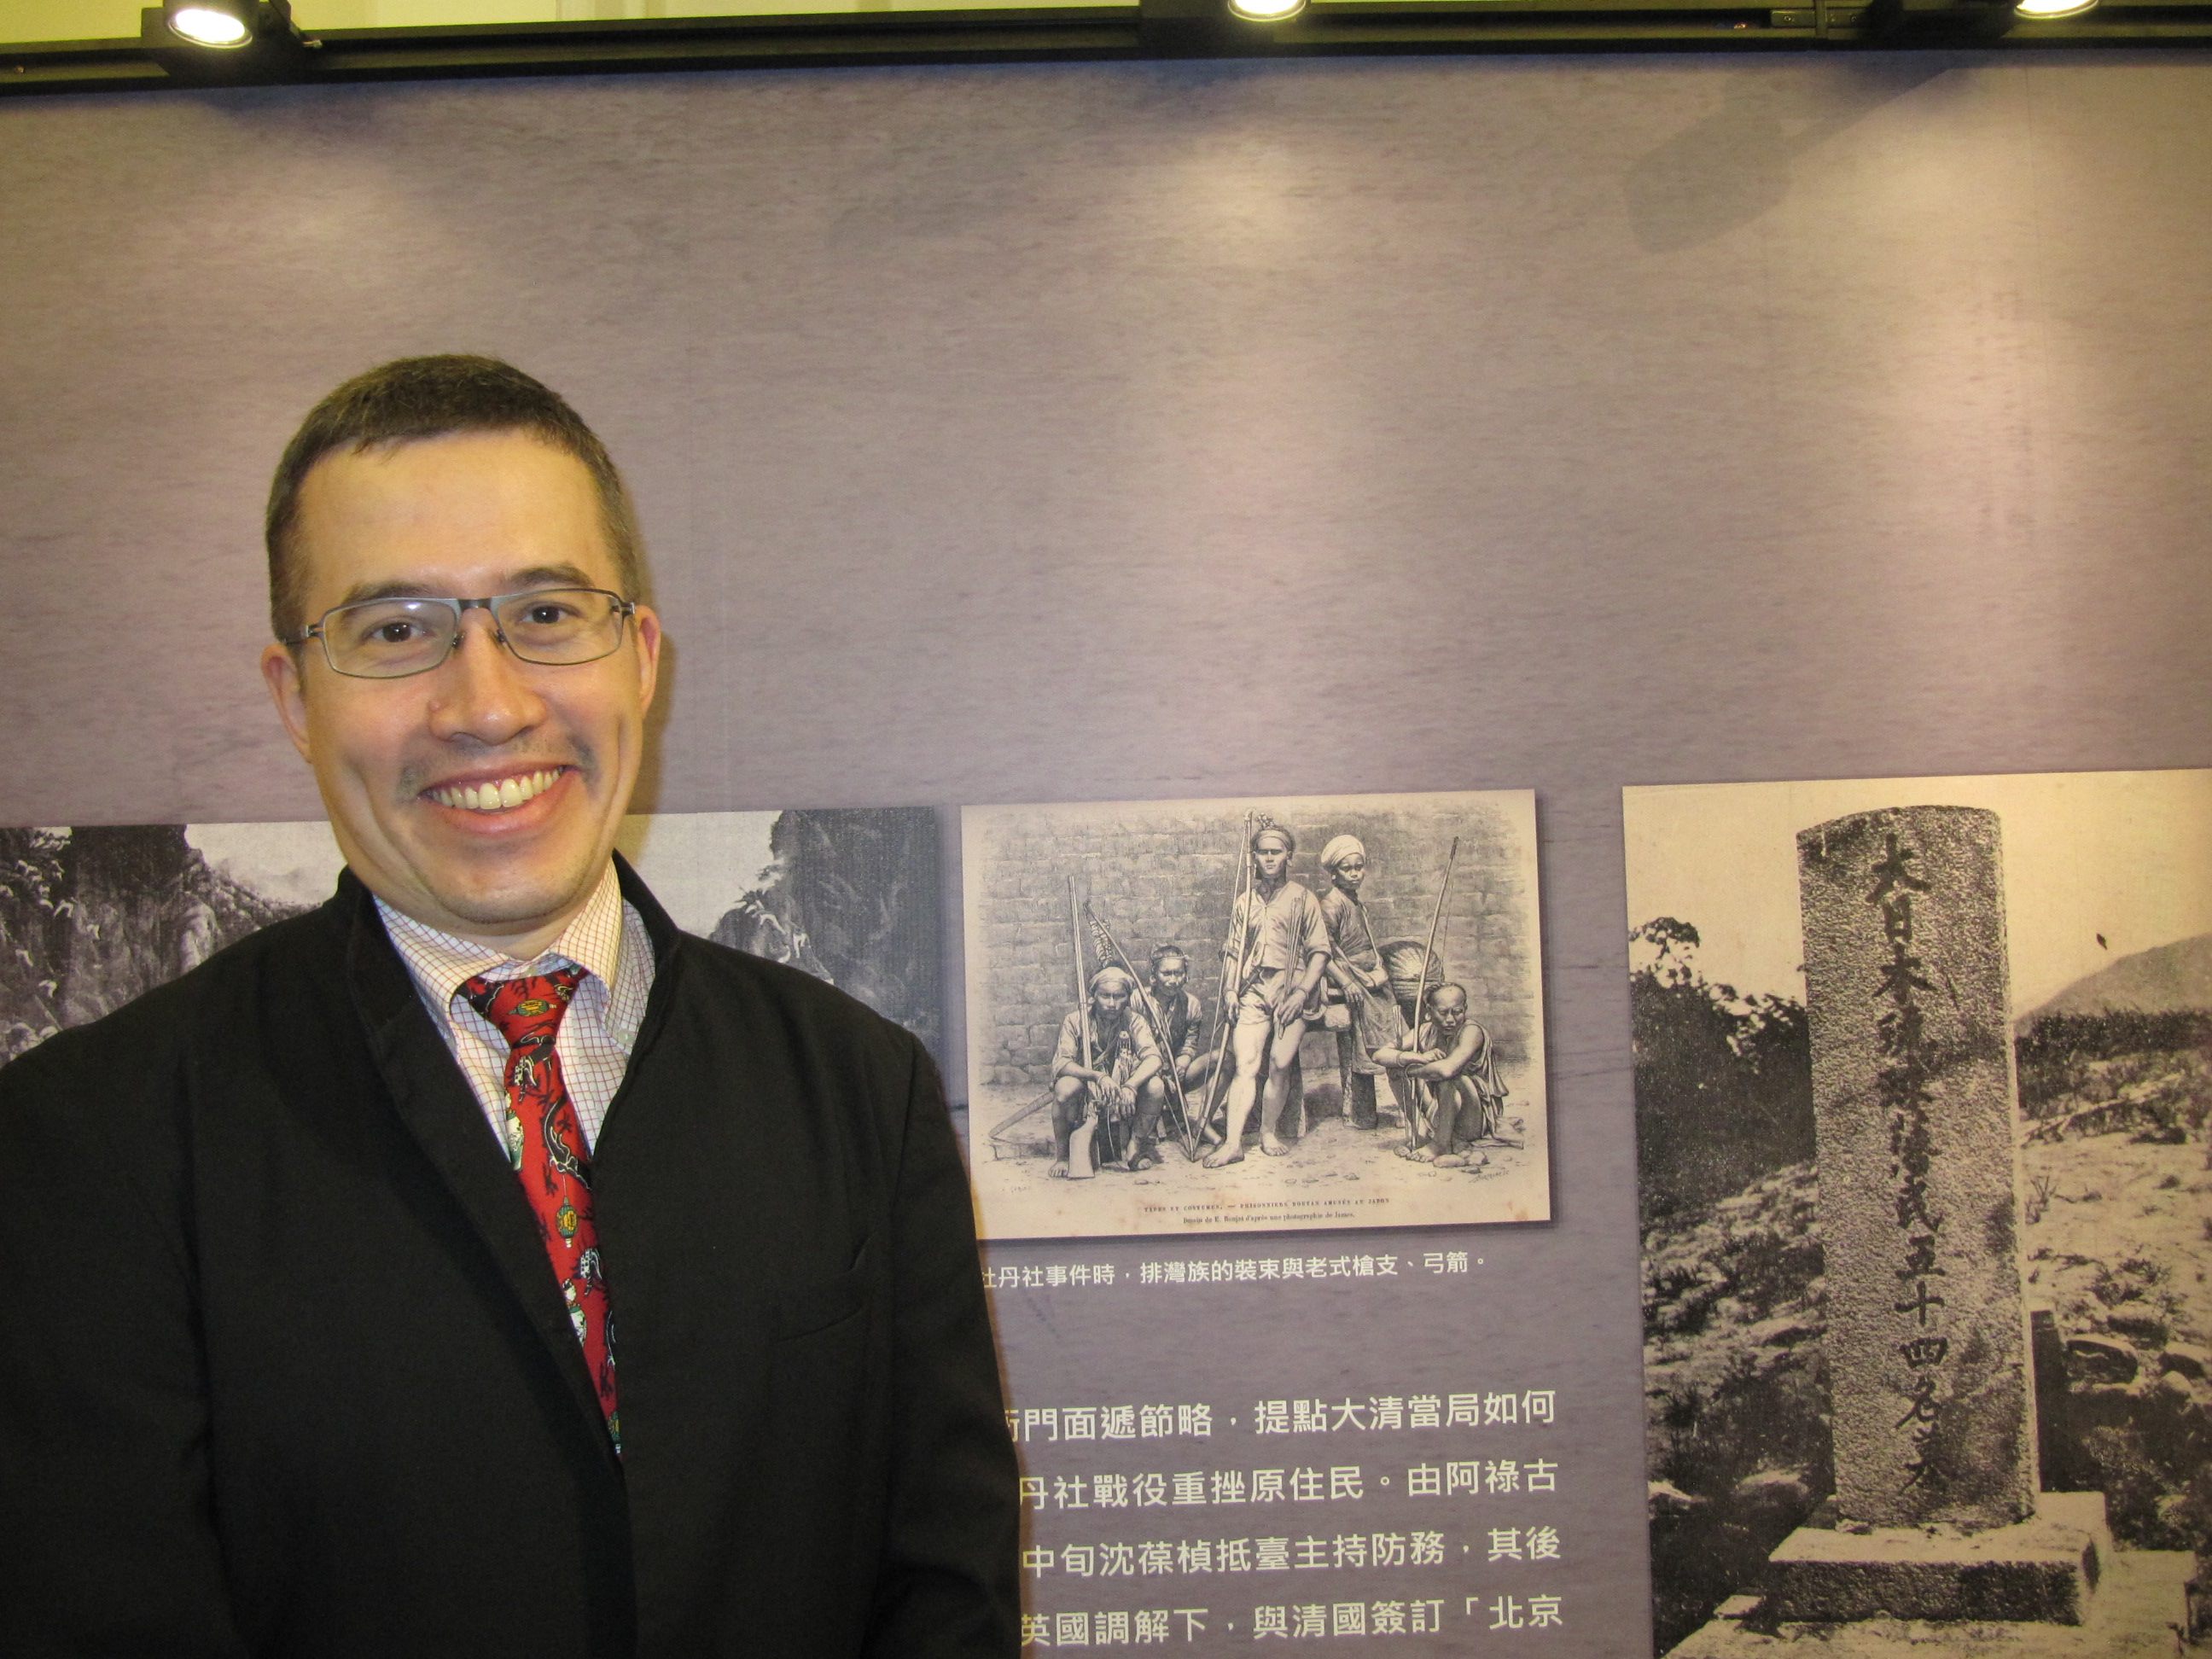 Guillaume Delvallee, deputy director of the French Office in Taipei, says the exhibition shows the evolution of the European understanding of Taiwan